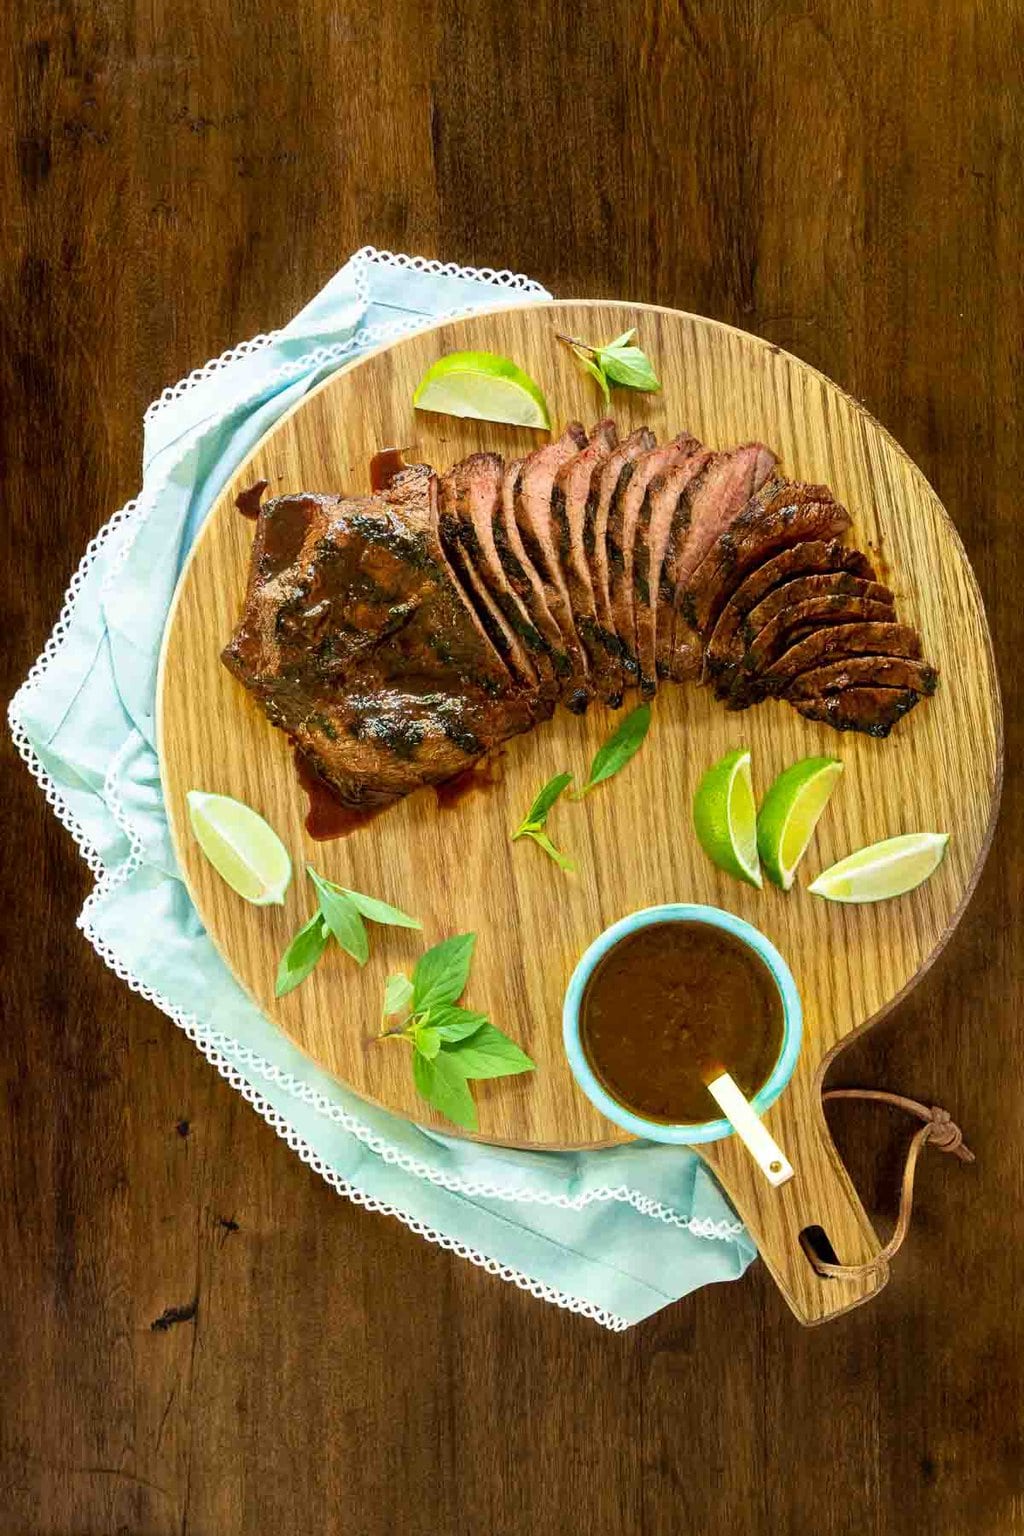 Vertical overhead photo of Steve's Grilled Asian Steak on a round wood cutting board with lime wedges, fresh herbs and a bowl of sauce.